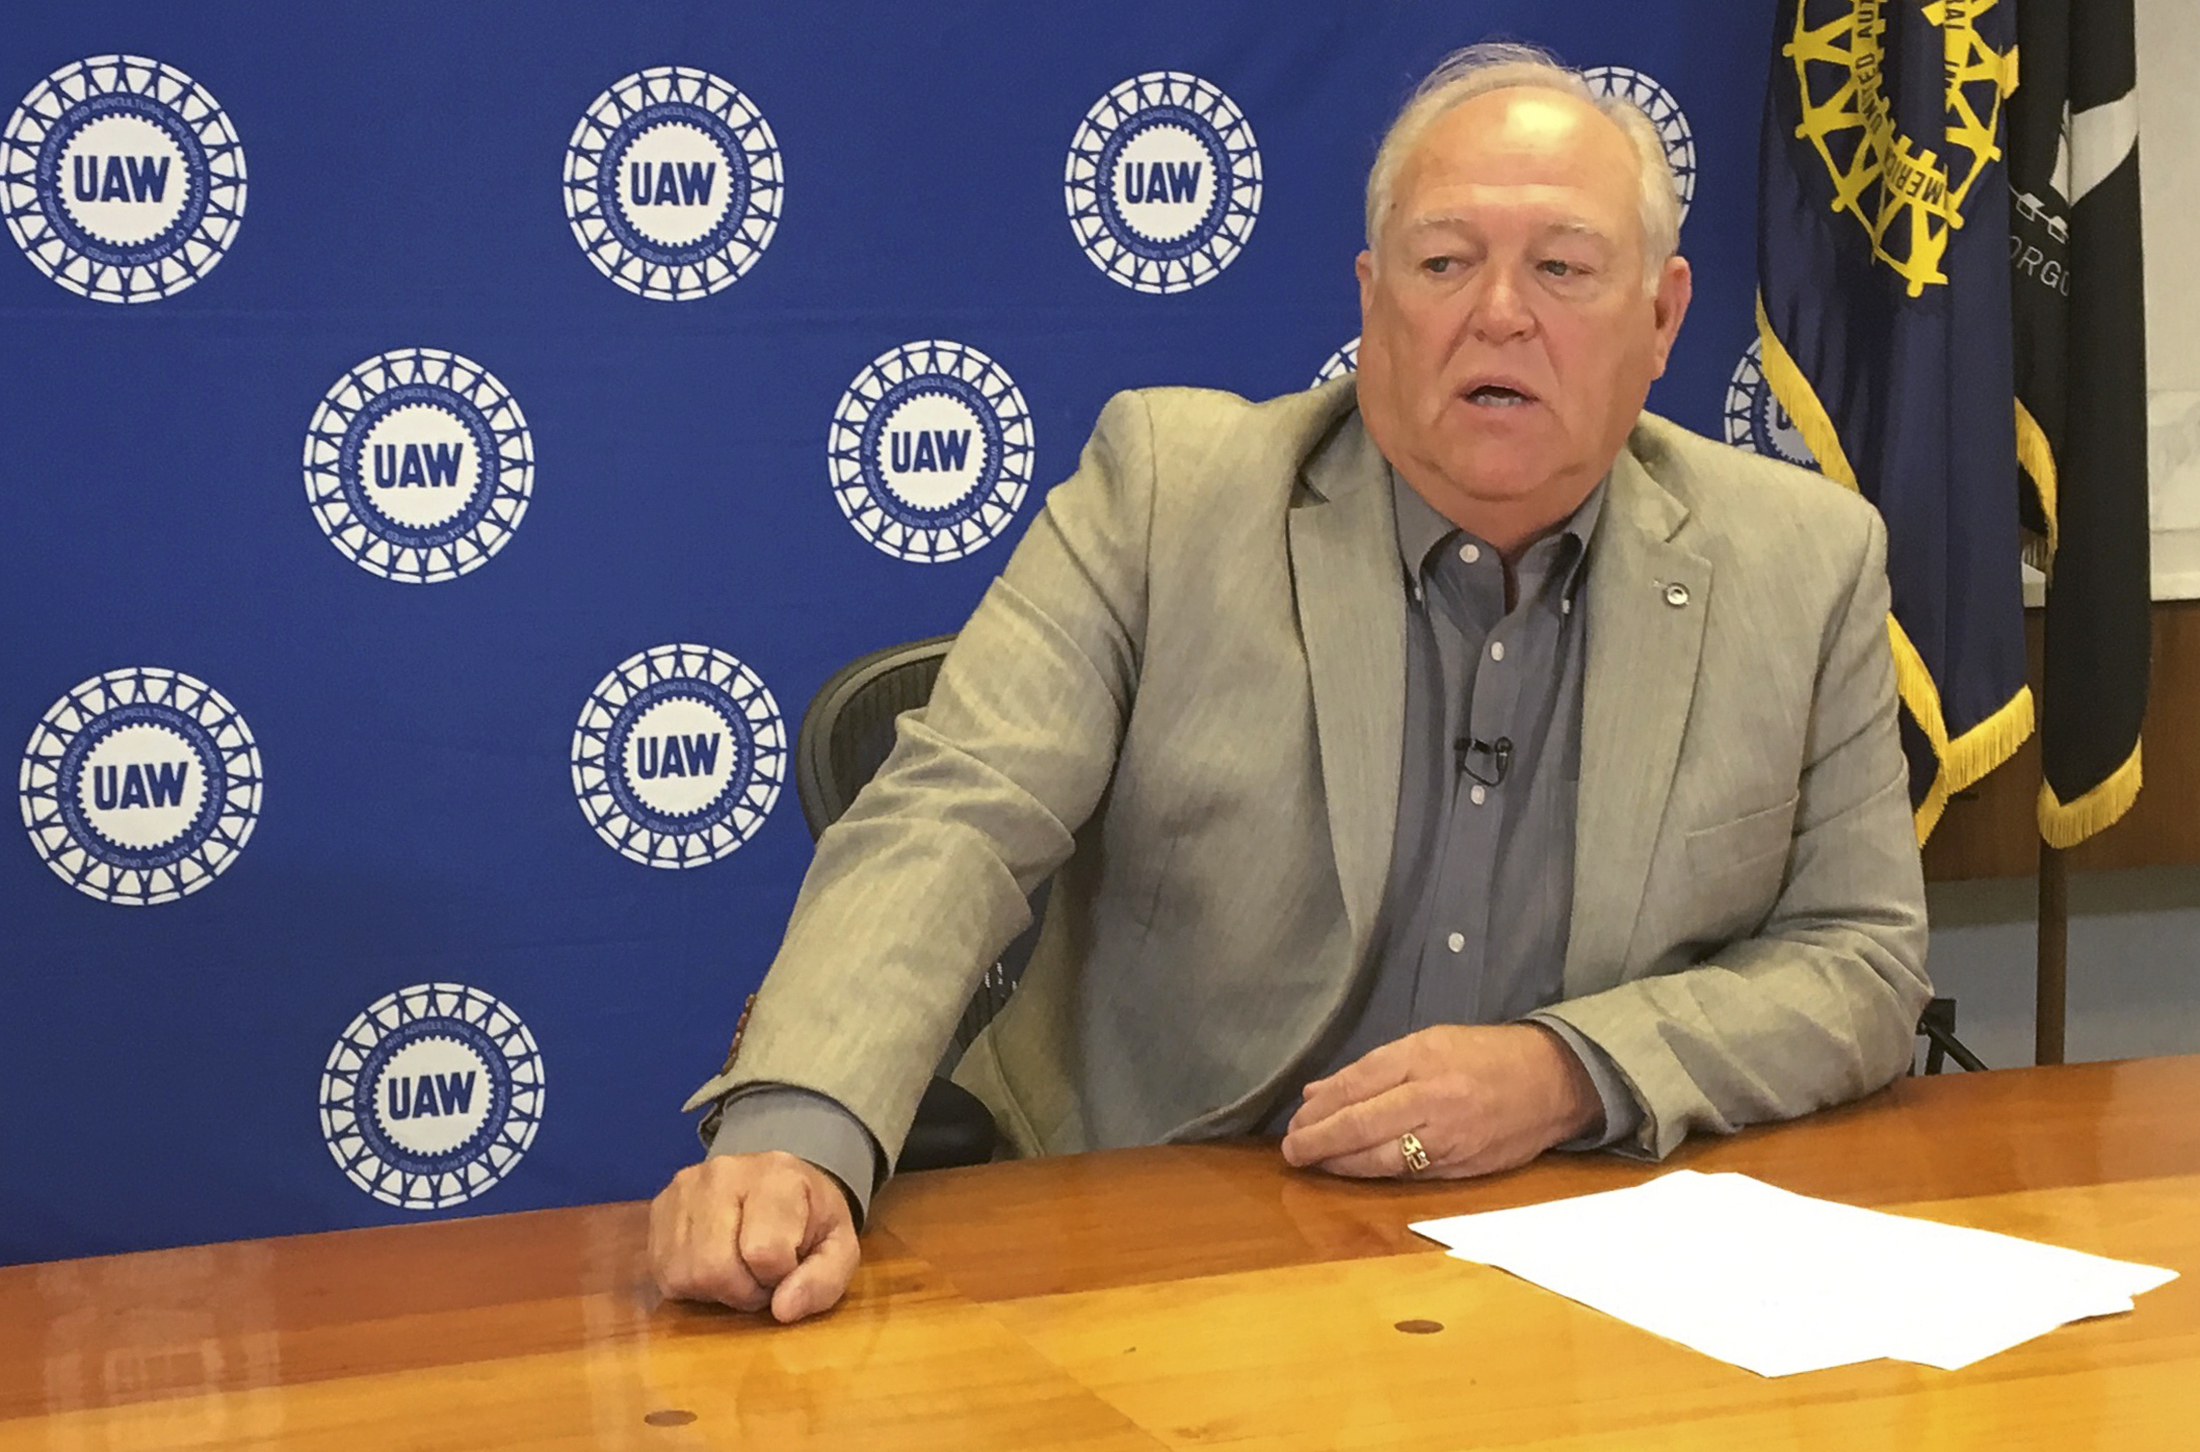 UAW President Williams at press briefing in Detoit